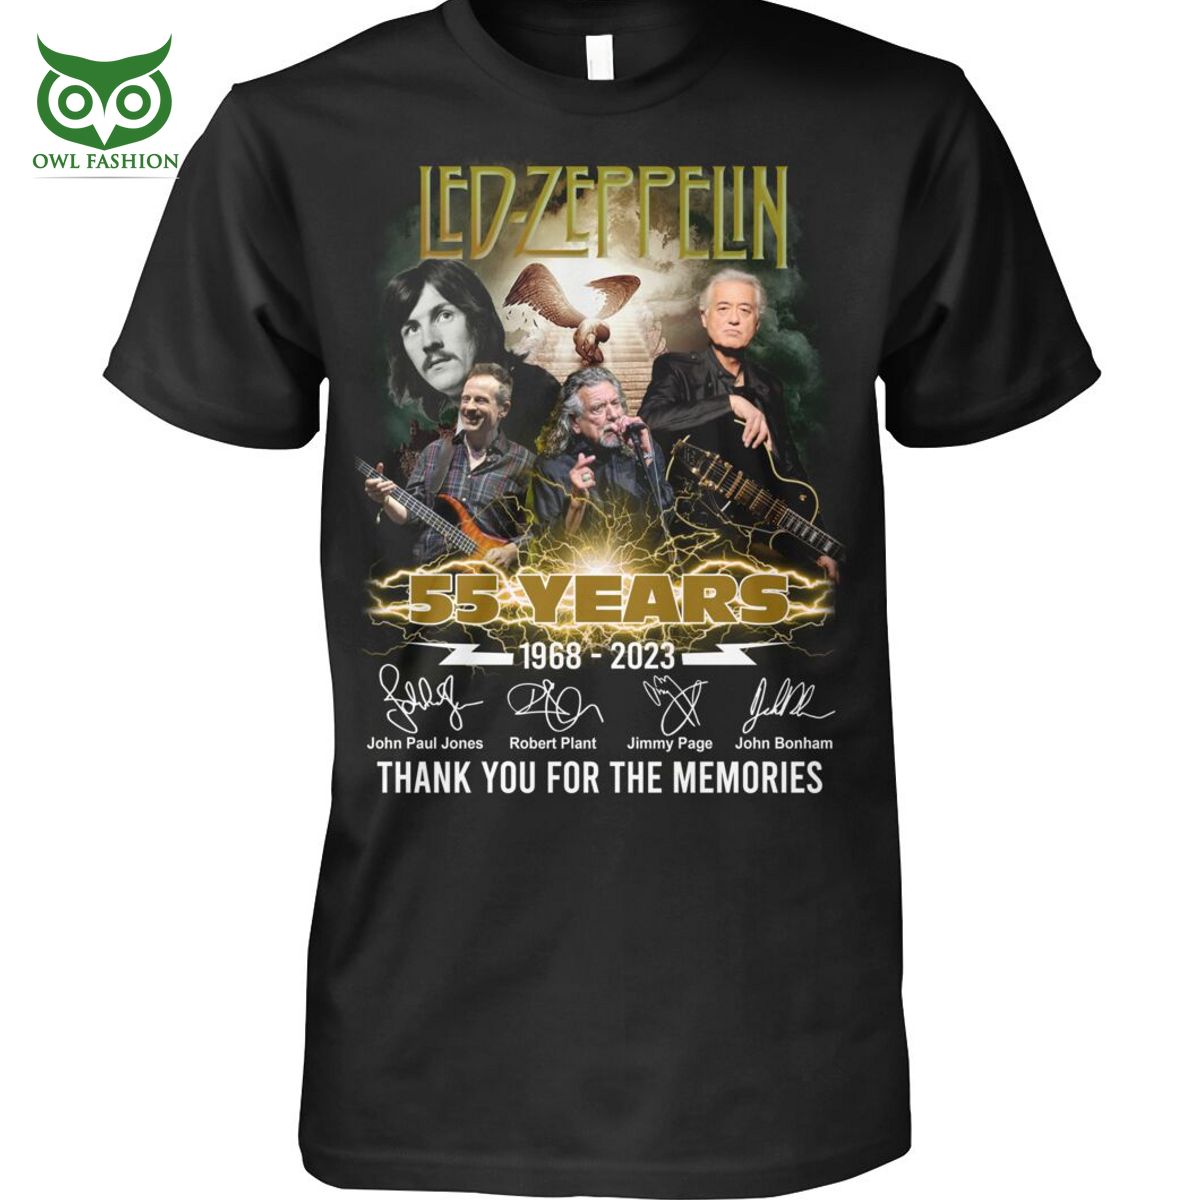 led zeppelin 55 years thank you for the memories 2d tshirt 1 E59Ew